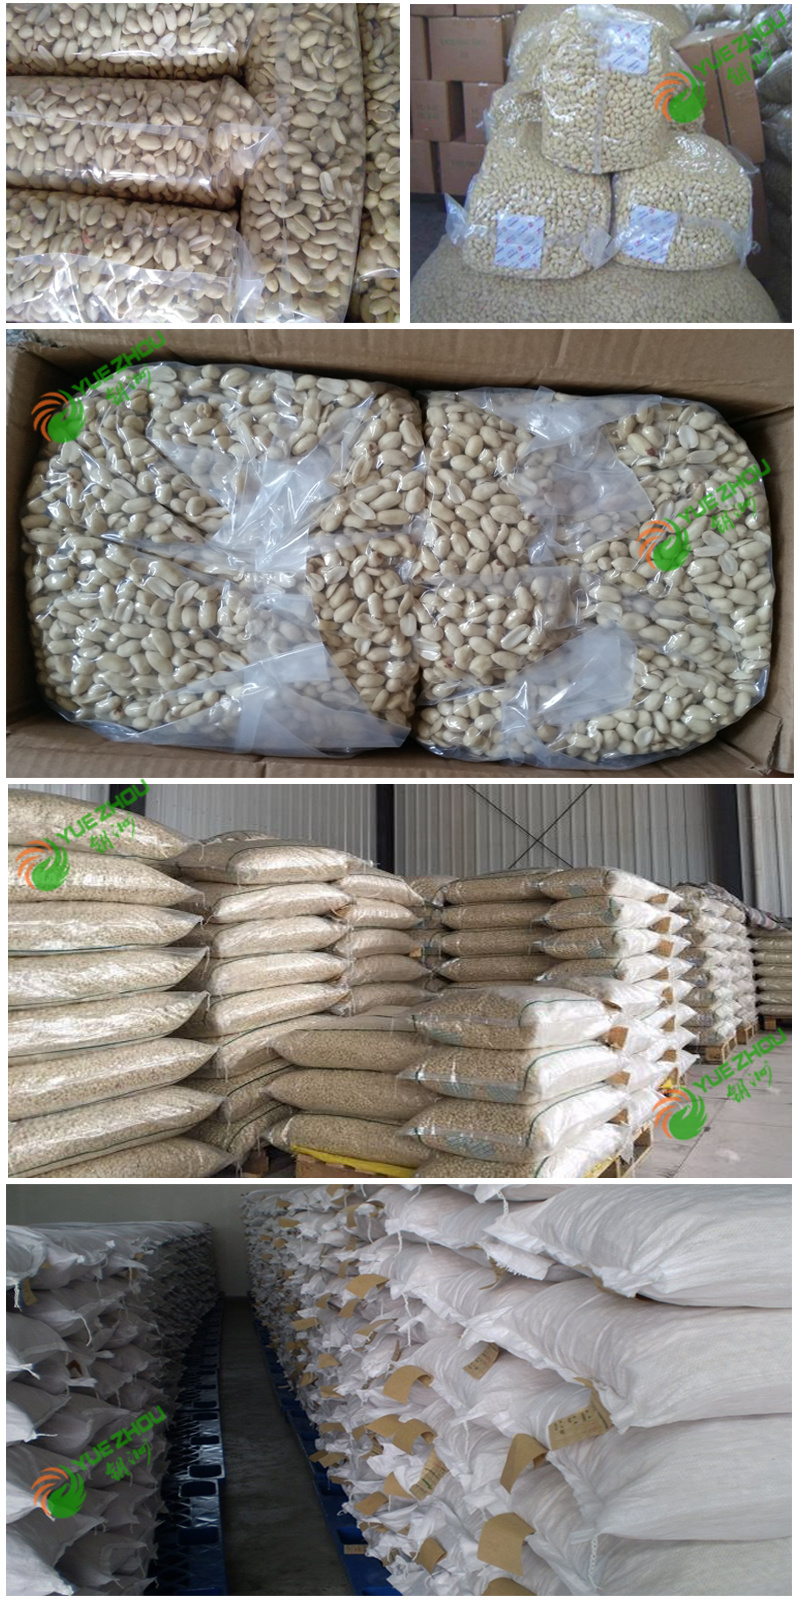 China Fried Spicy Peanut Kernels with 2020 New Crop